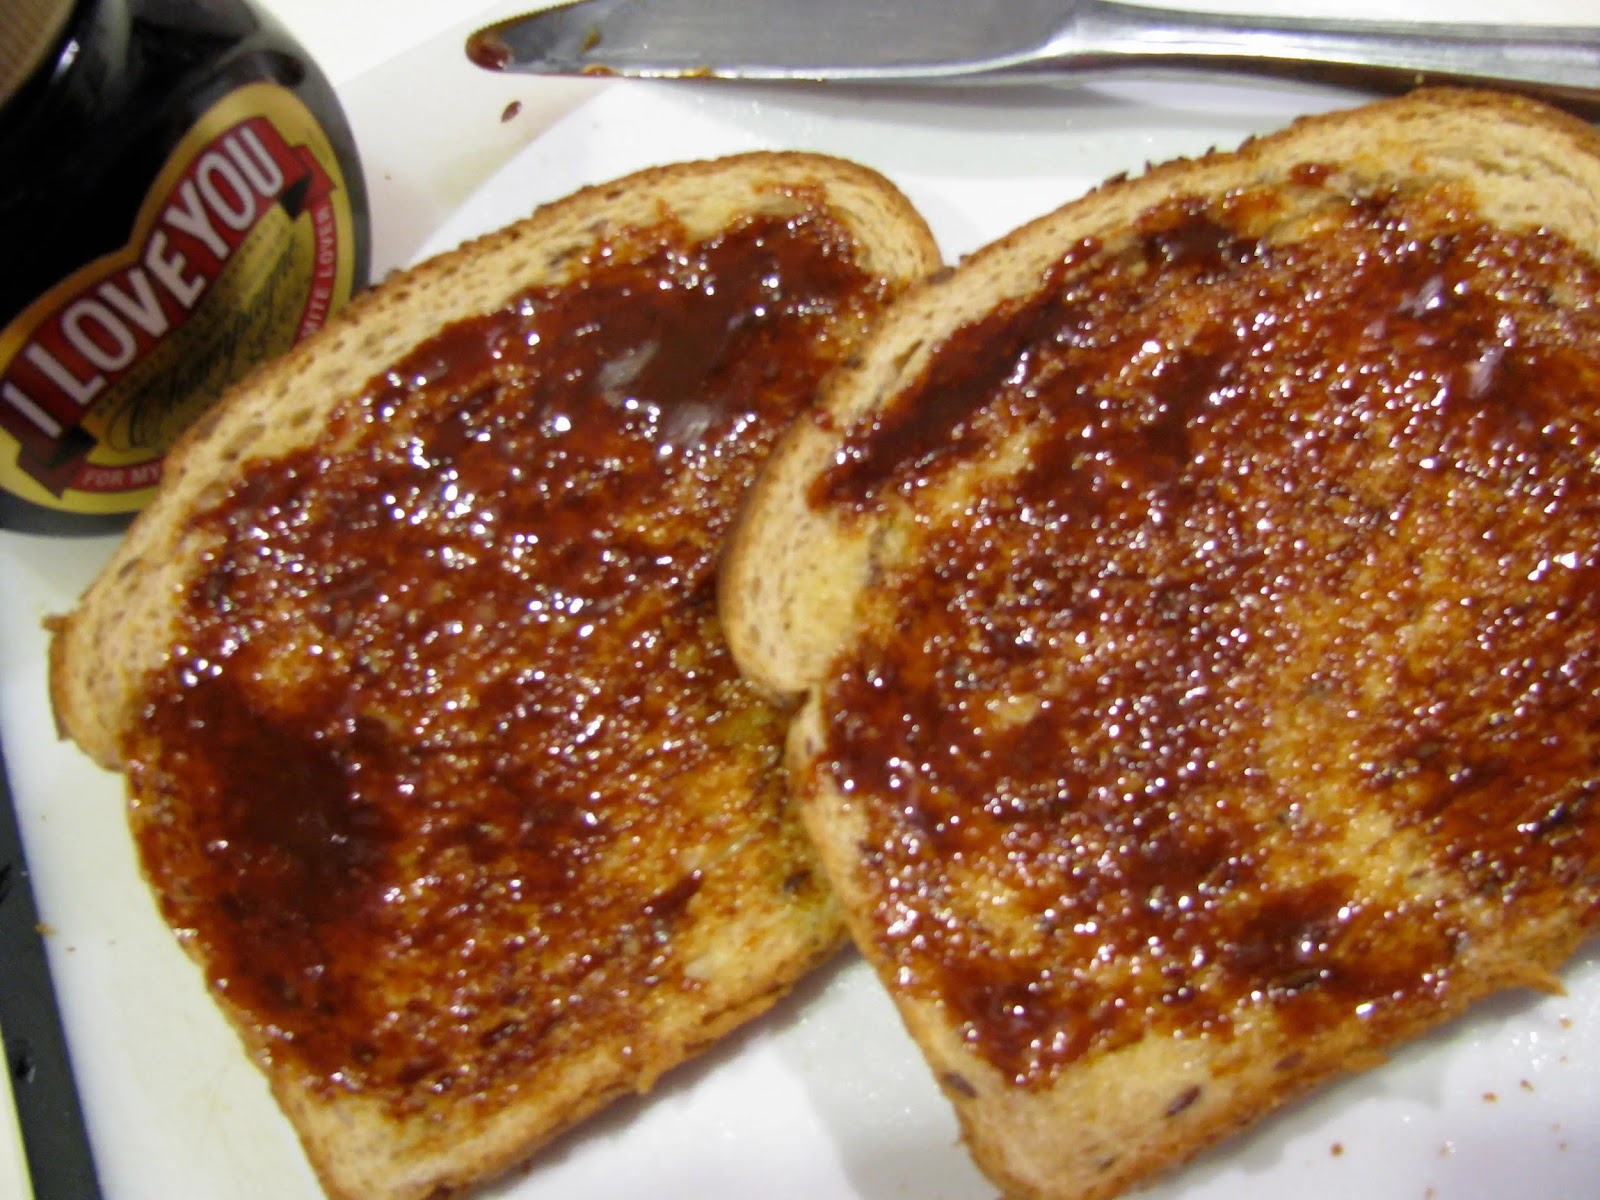 A thick slice of golden brown sourdough toast, generously spread with melting butter and a thin layer of dark brown Marmite, served on a white ceramic plate with a silver butter knife resting beside it.